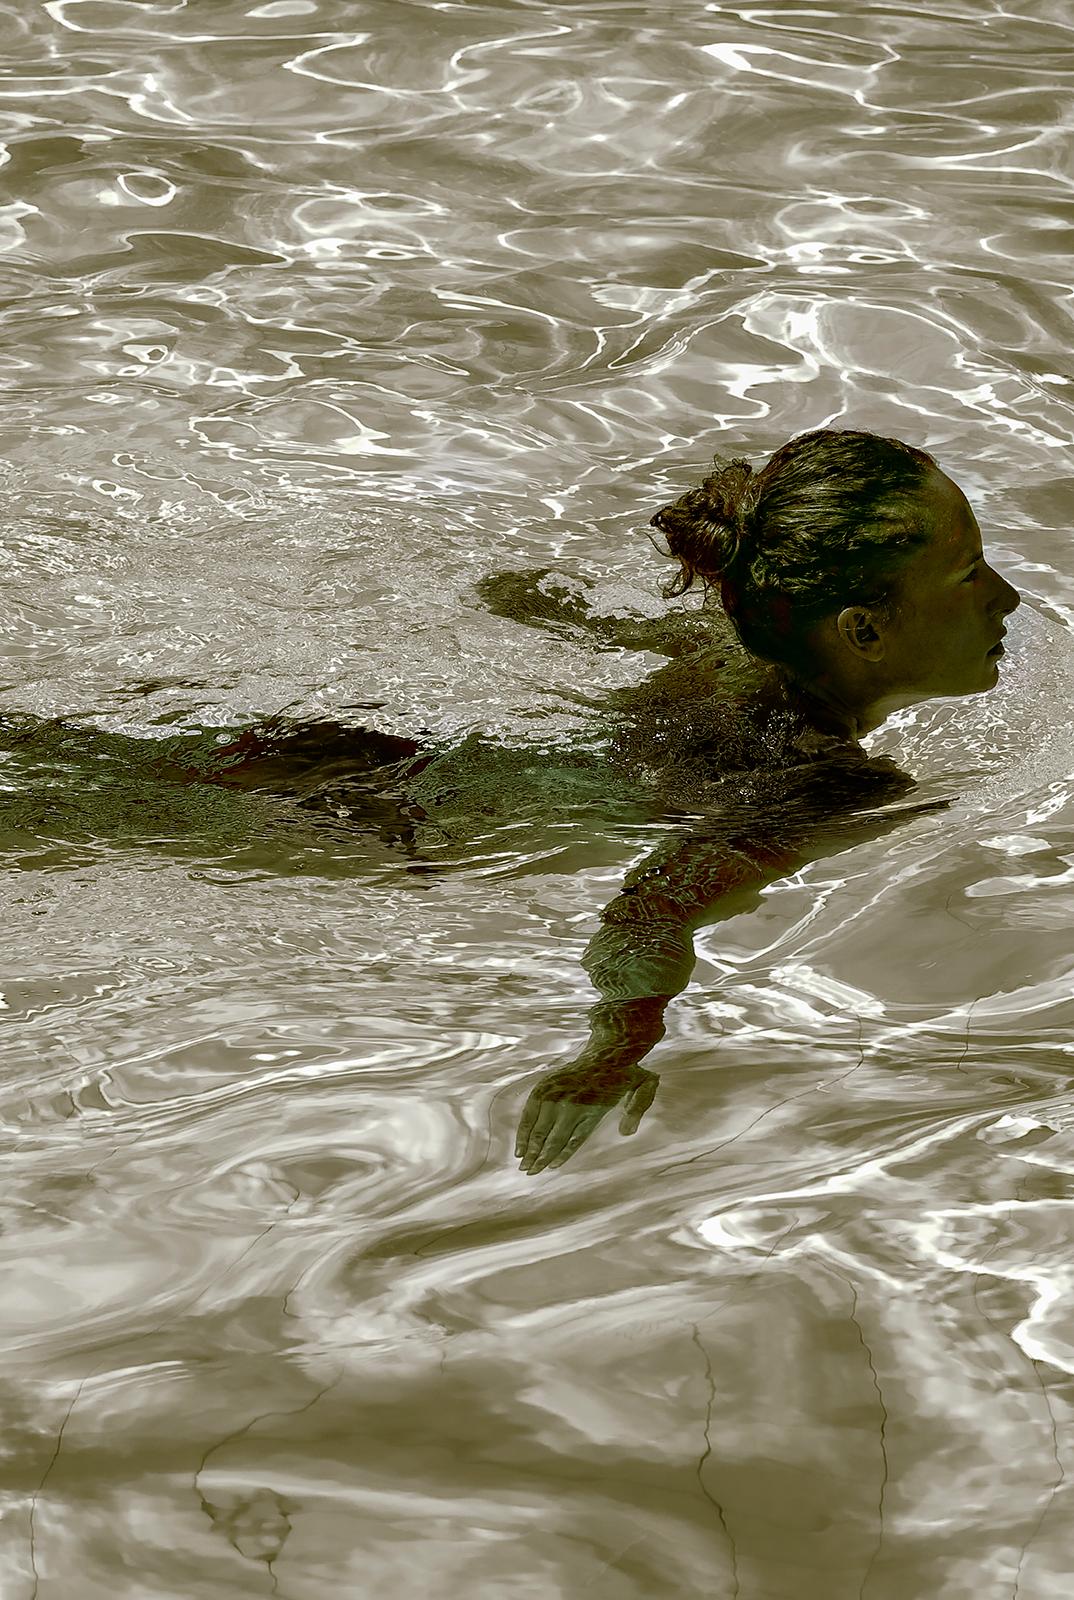 Swim - Signed limited edition contemporary print, Colour pool photo, Figurative - Photograph by Ian Sanderson